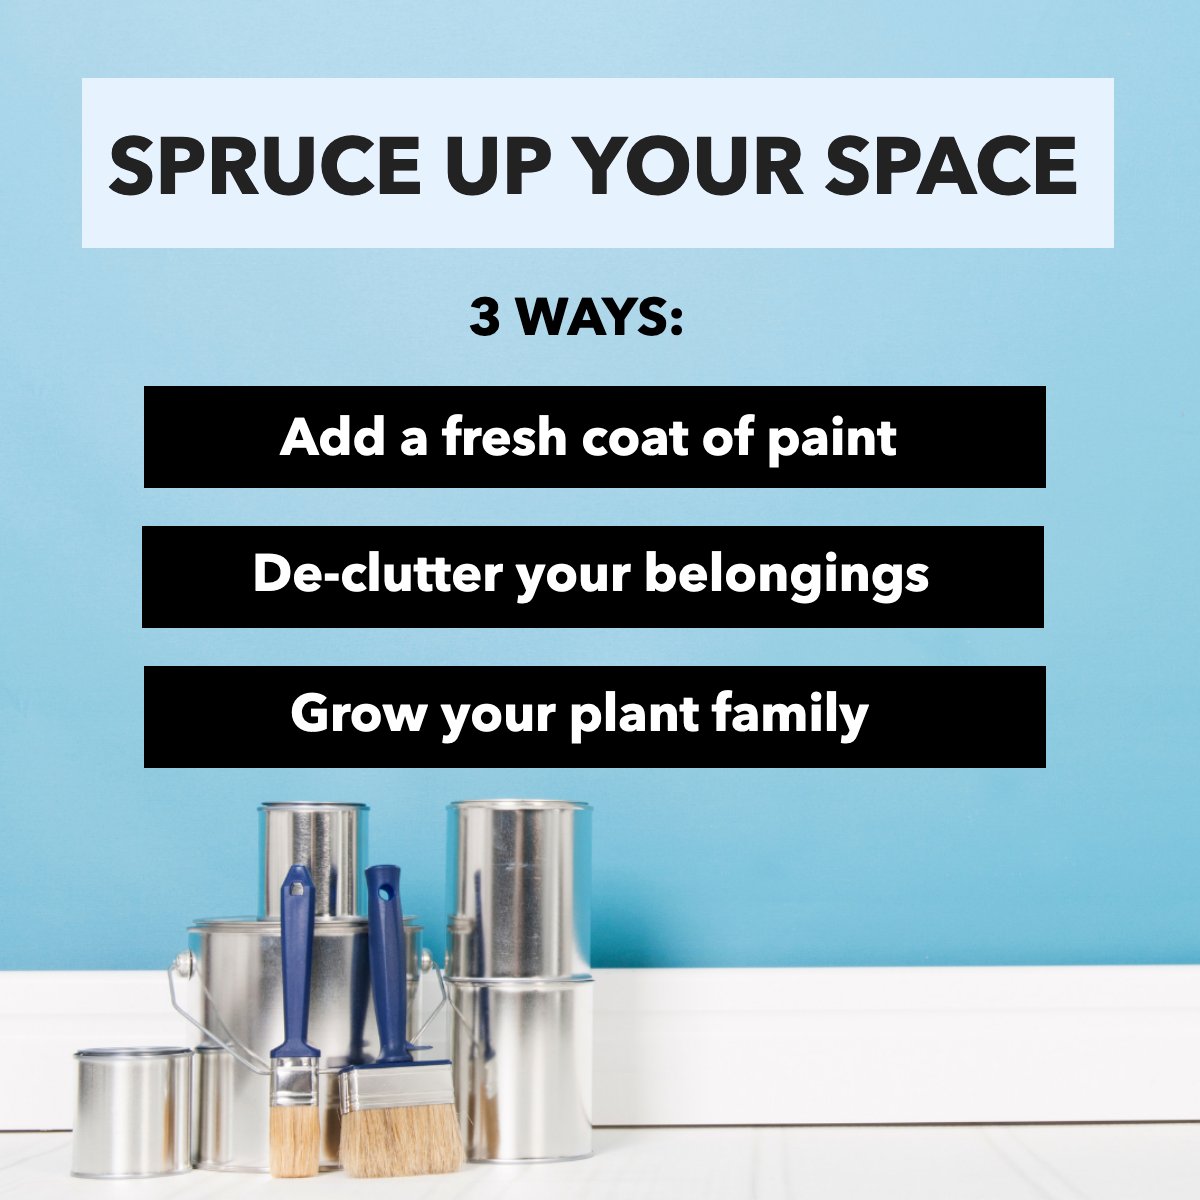 Find out 3 ways to give a fresh look to your spaces. 

#spruceupyourspace    #spruceupyourhome    #spruceuptheplace    #freshpaint
#premierrealestatenetwork #pren #realestate #realtor #barrettrealestate #bre #prescottquadcity #sedonaverdevalley #veronicamorrow